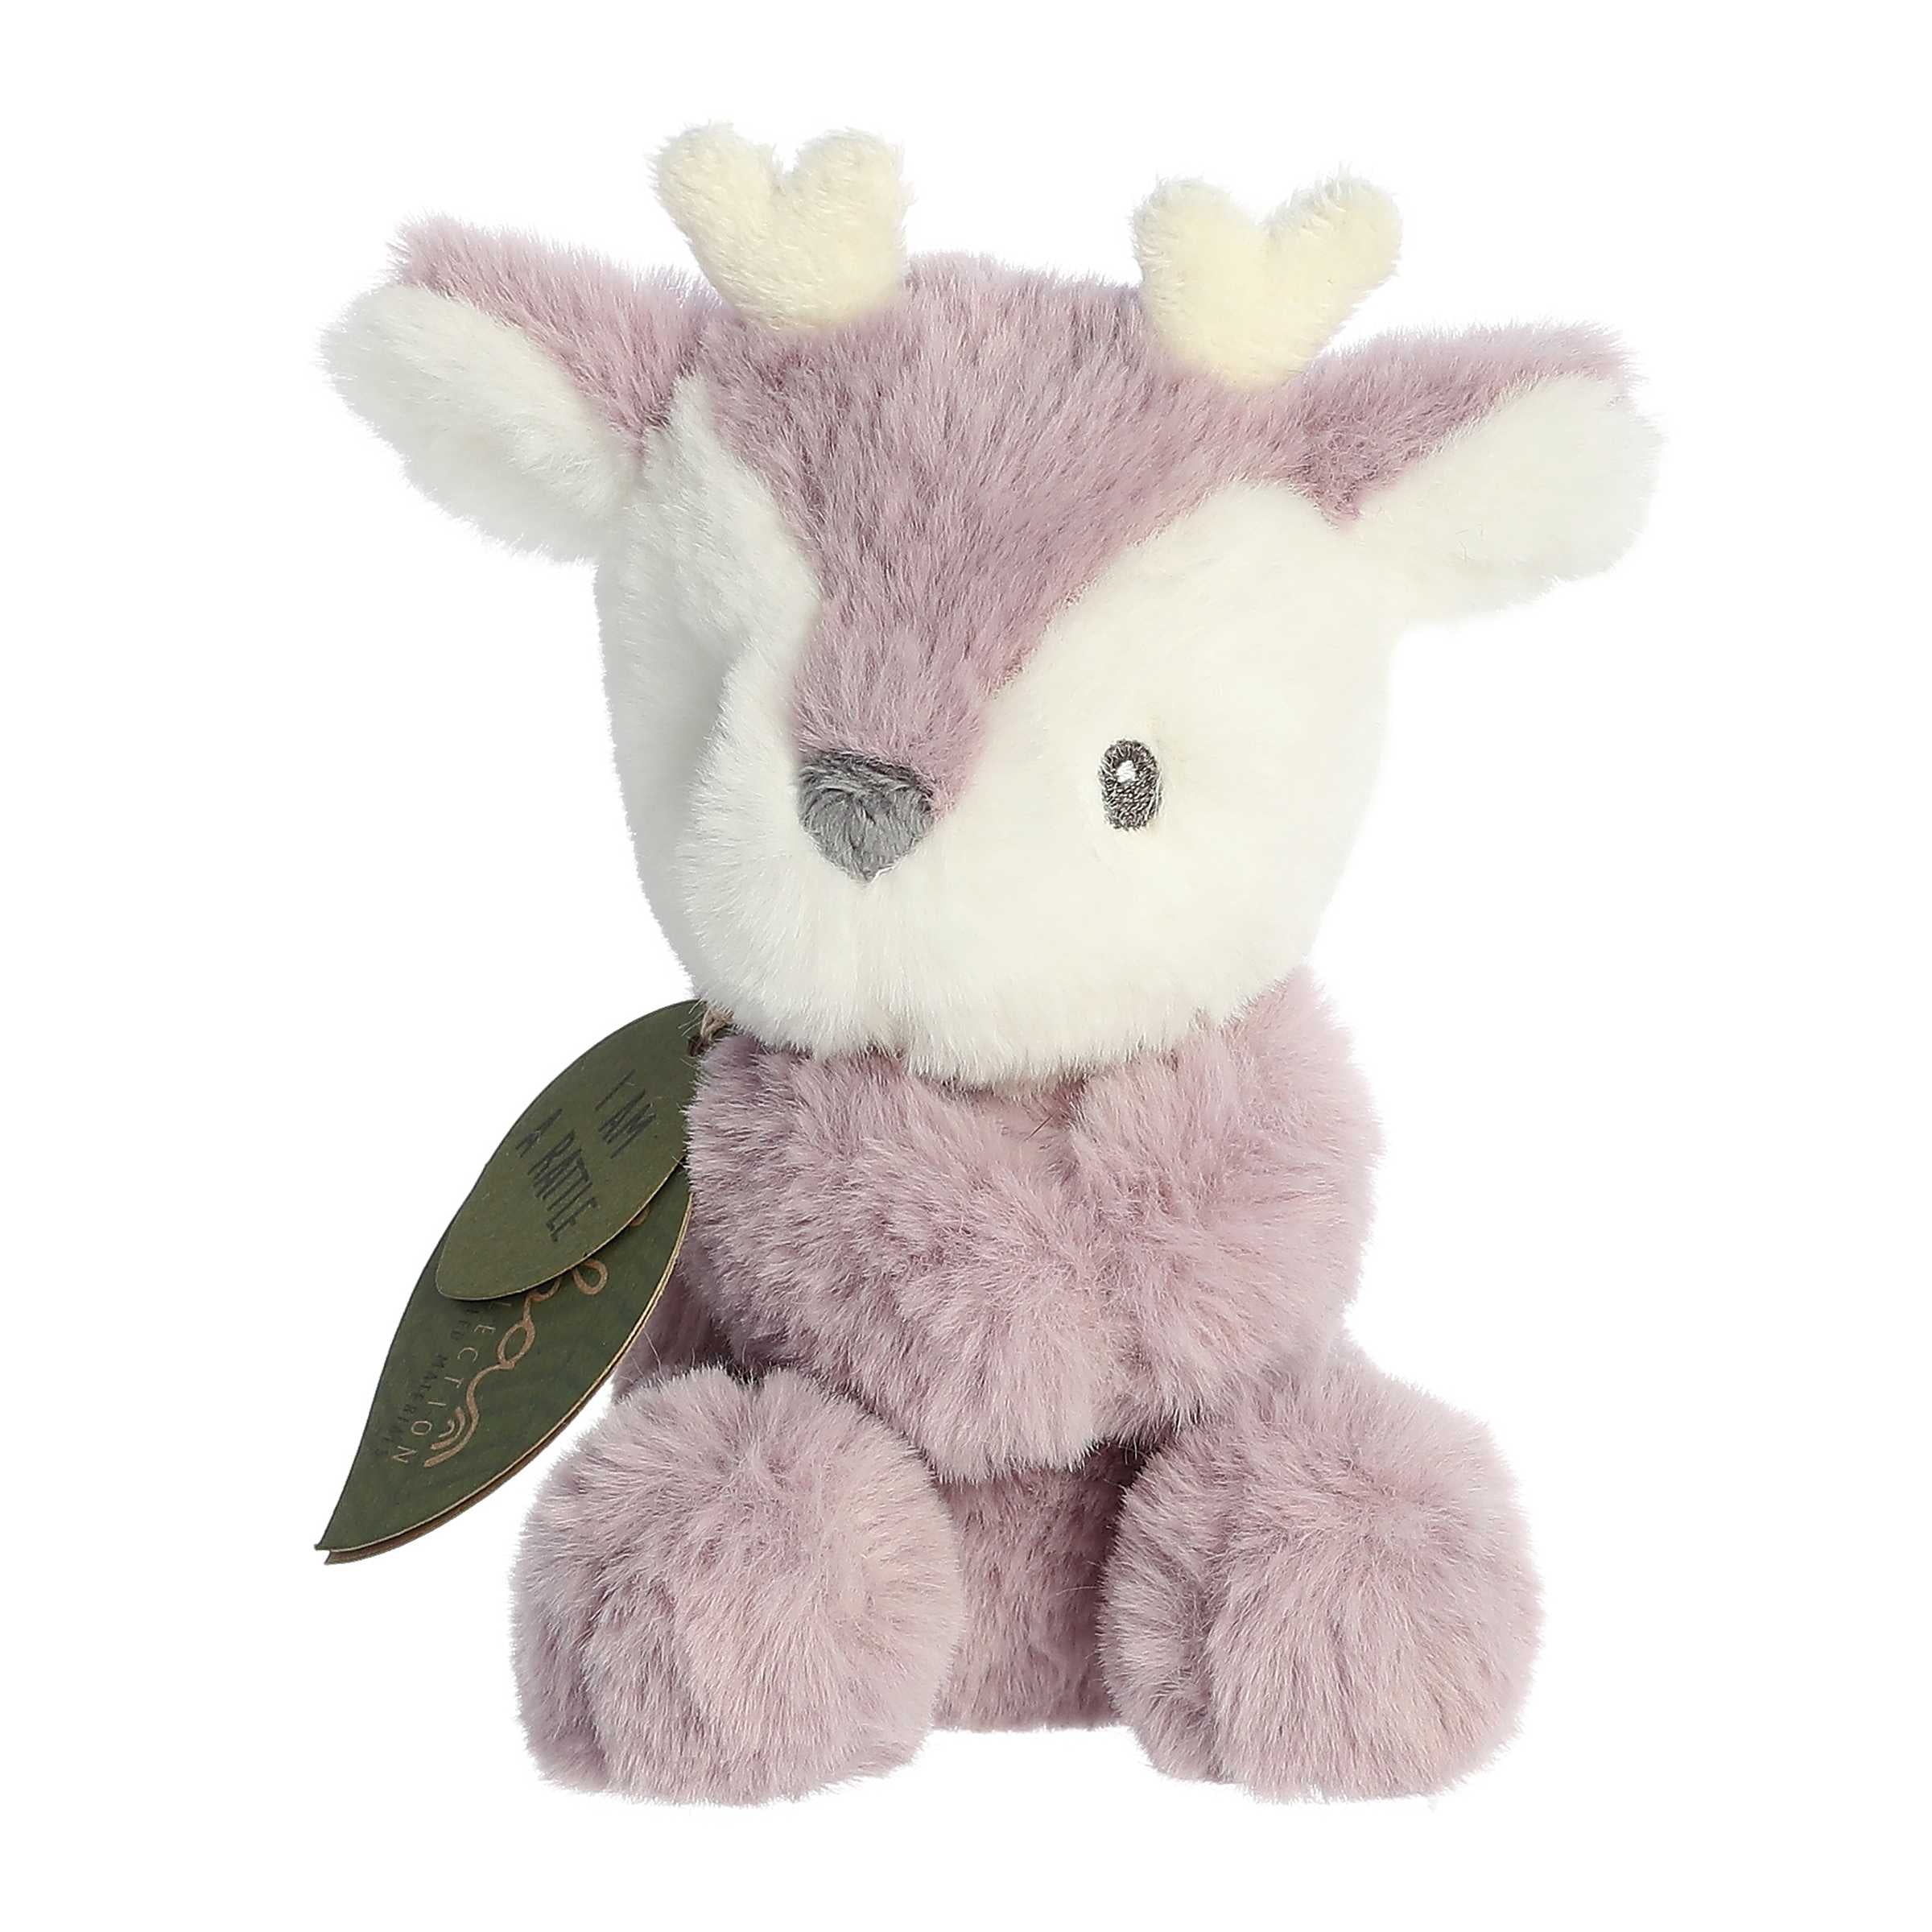 ebba™ - Eco Ebba™ - 6" Fawn Rattle™